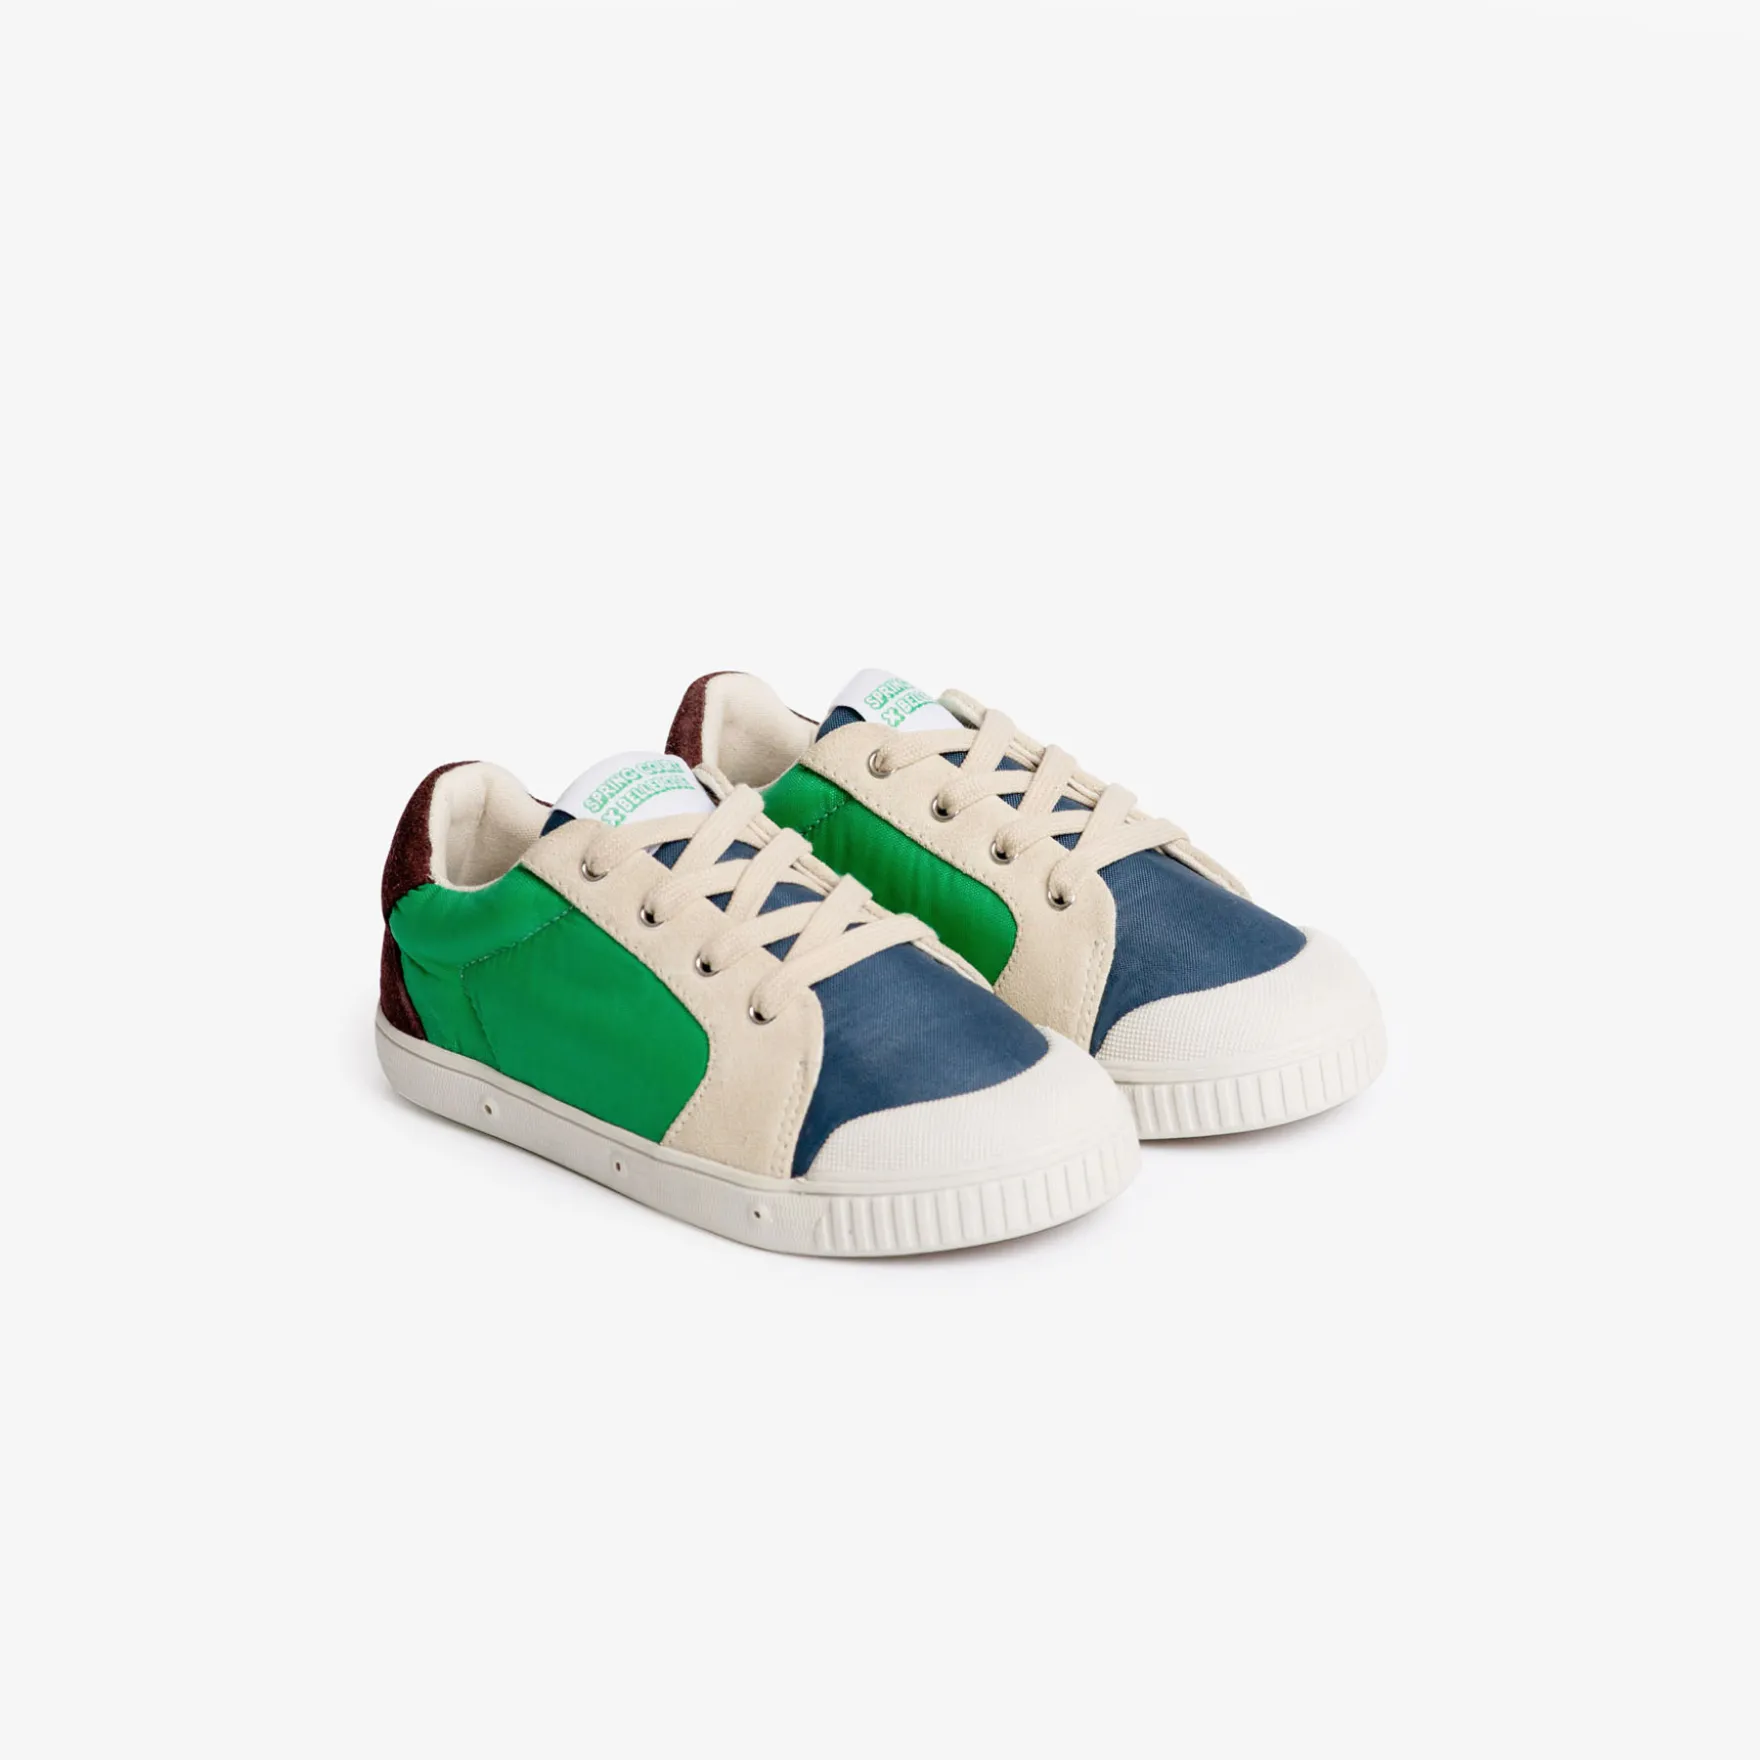 sneakers in limited edition for kids